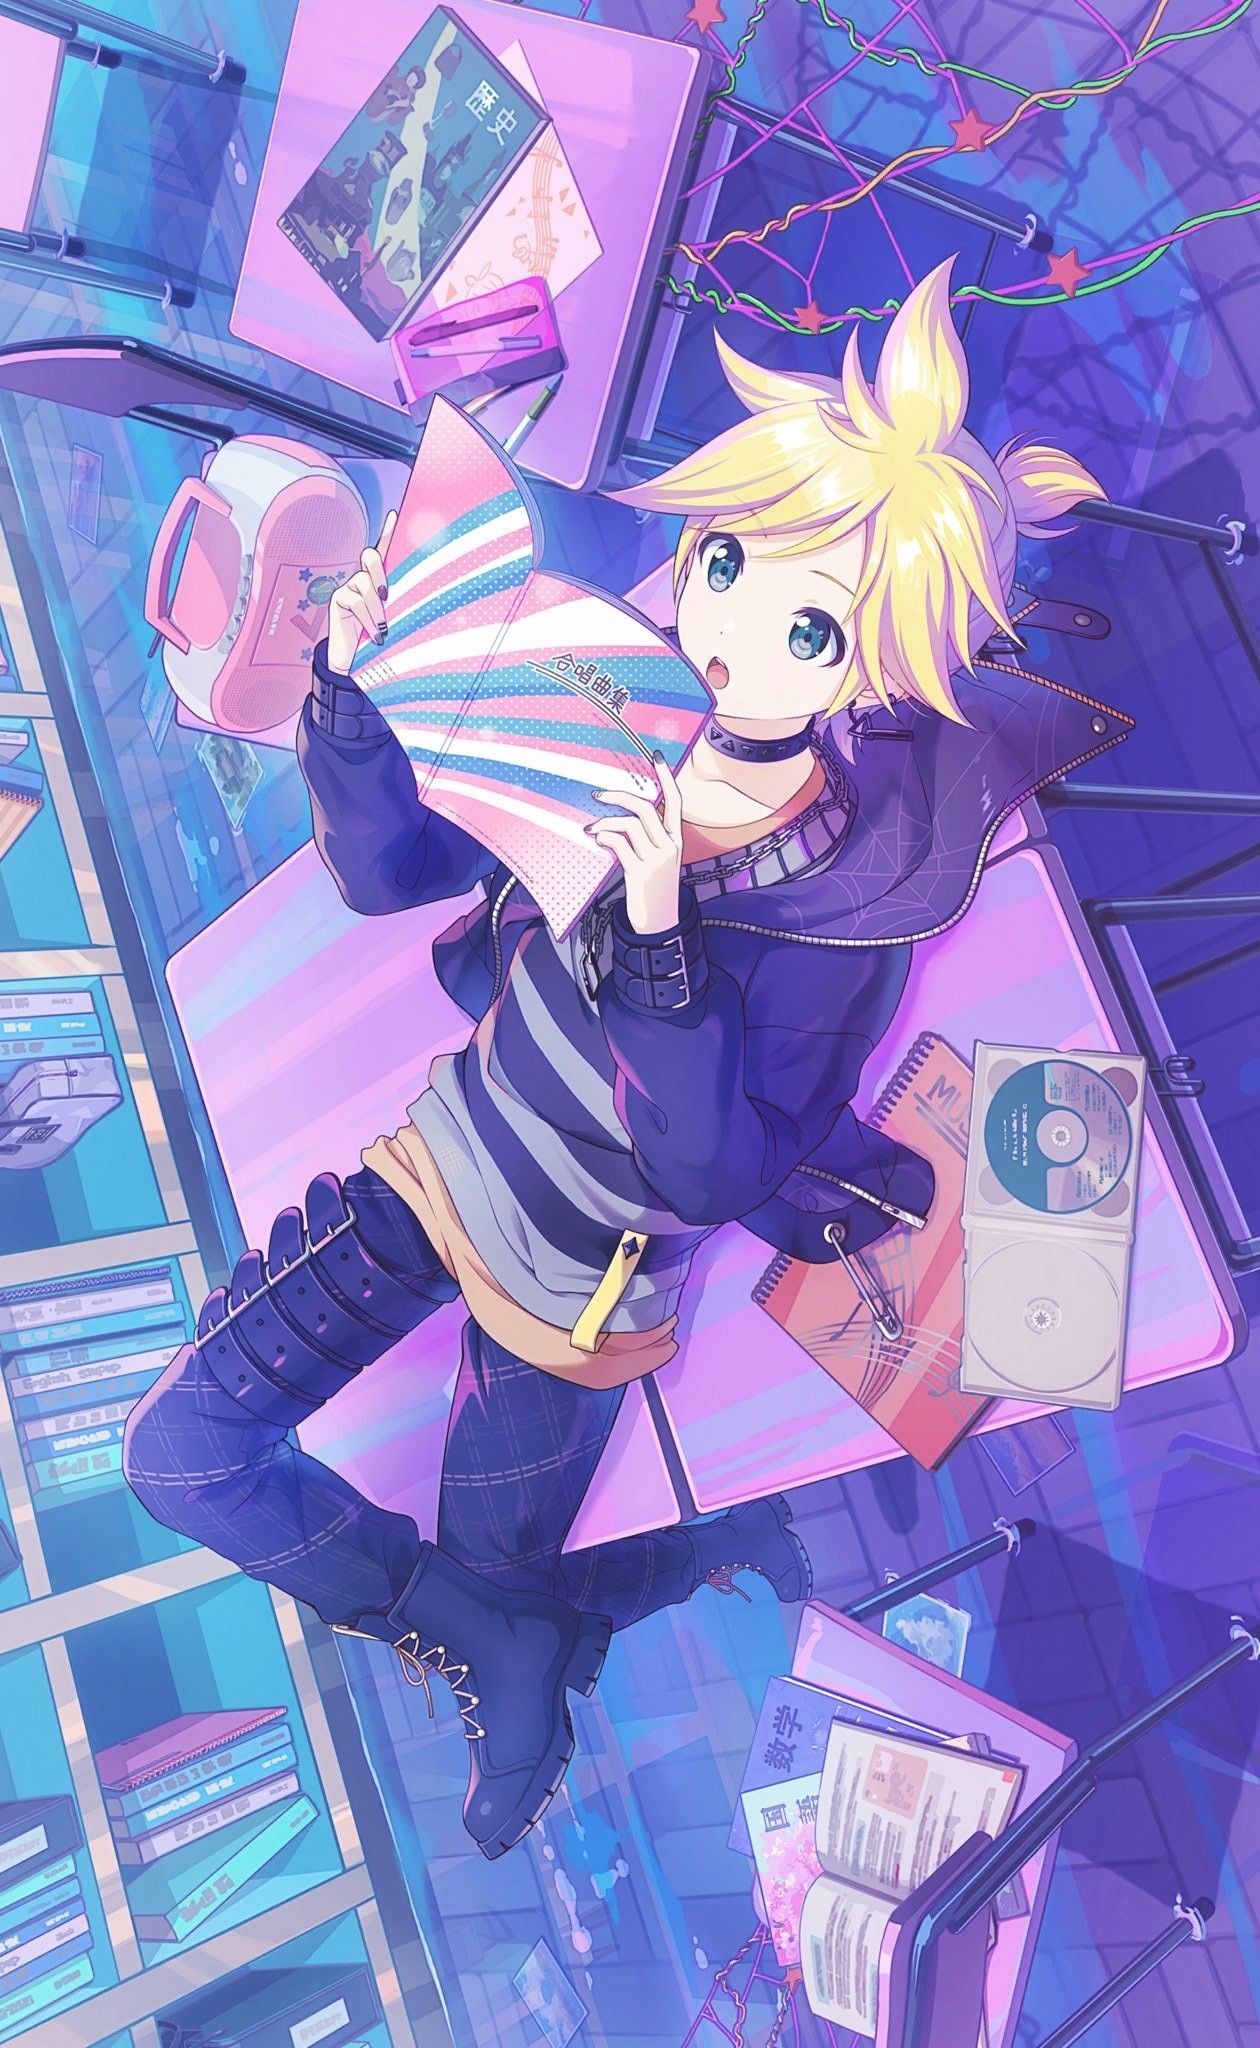 Anime girl with blonde hair holding a pink book in a purple room - 